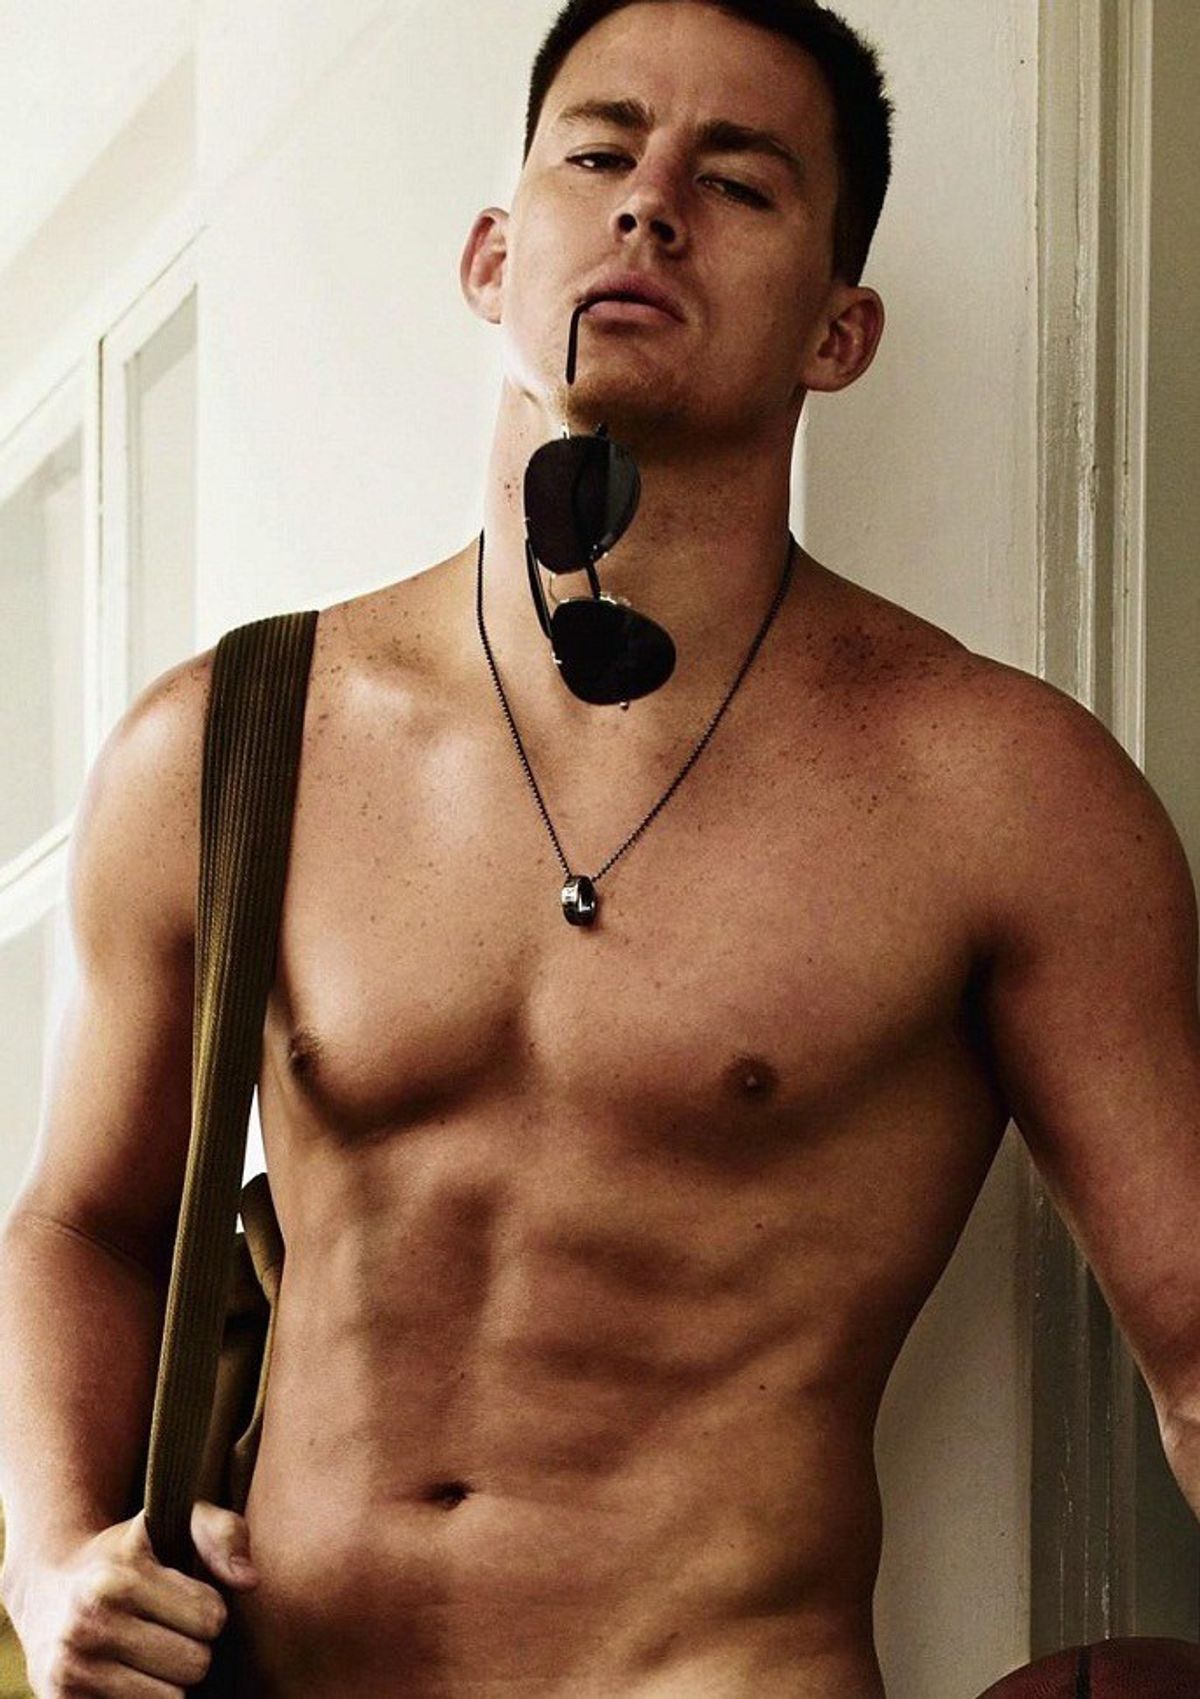 10 Things Channing Tatum (Probably) Does That Show He's Just Like The Rest Of Us